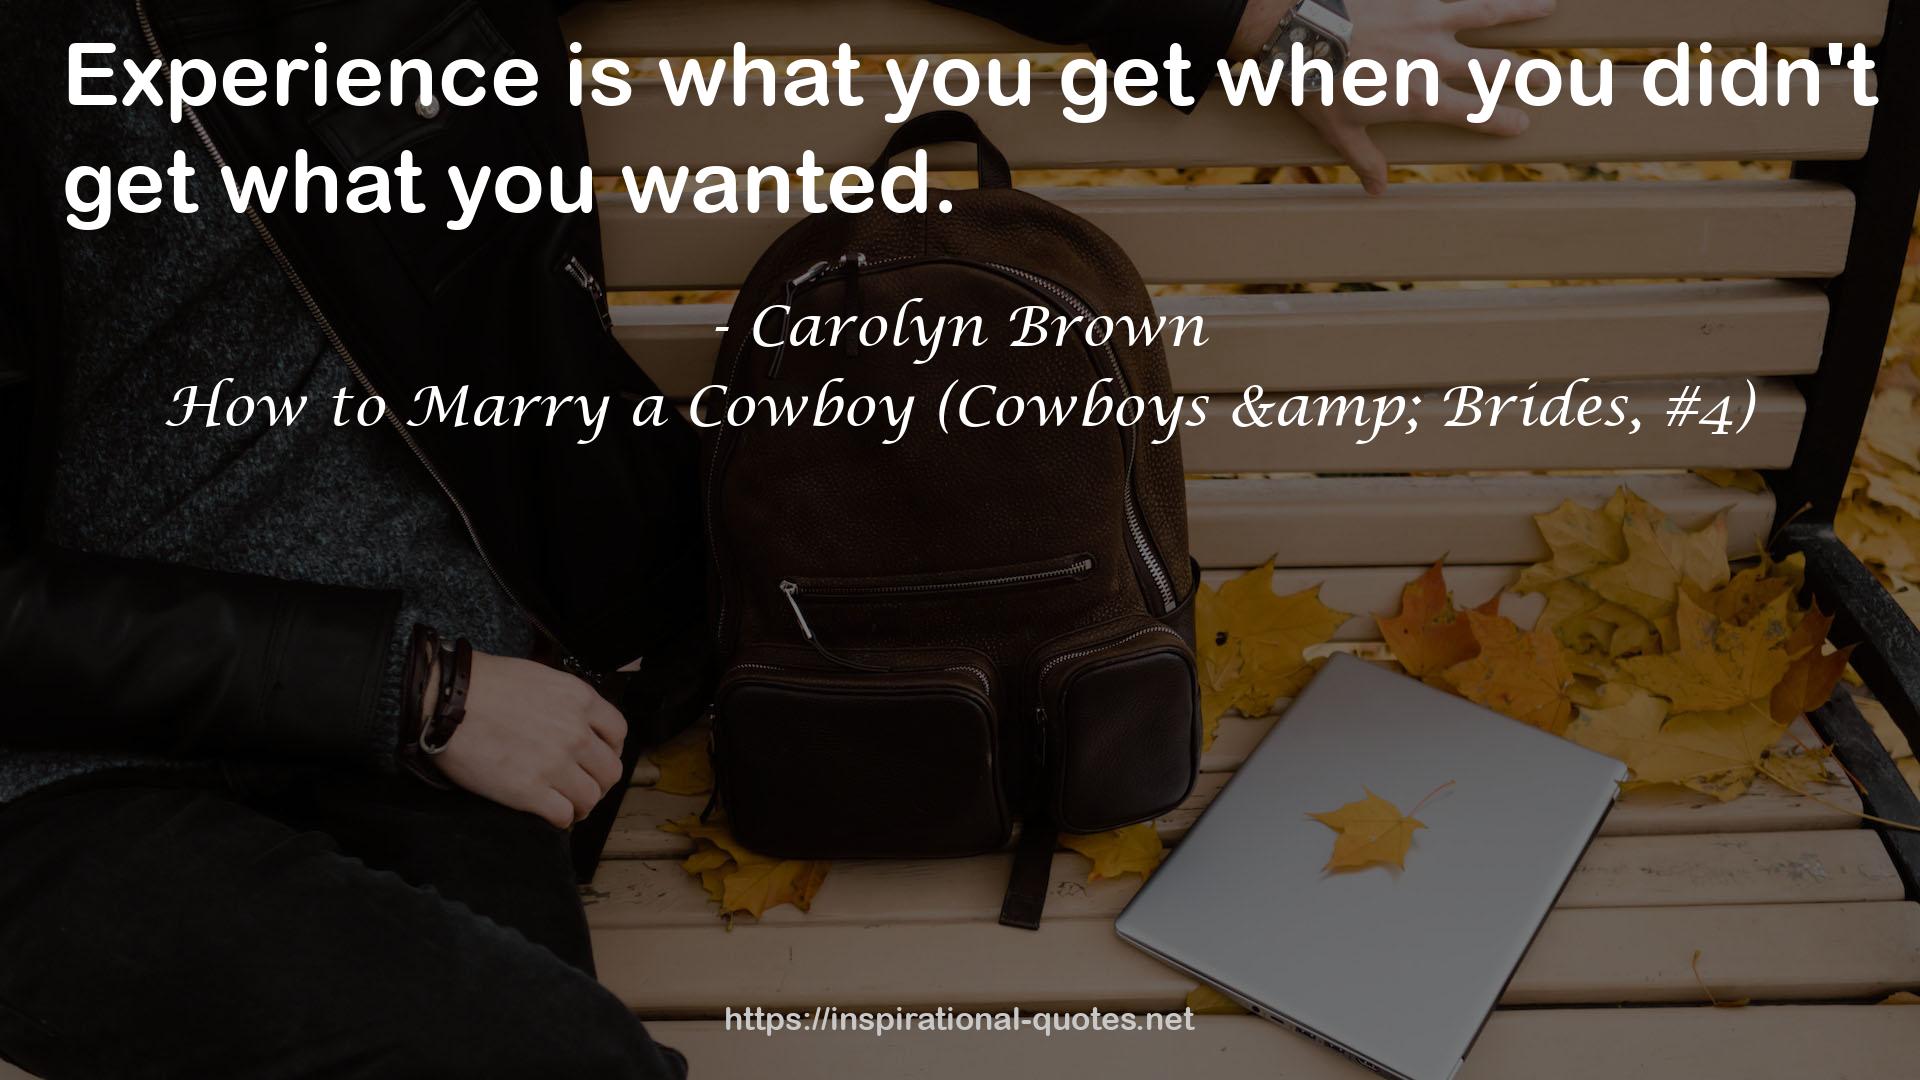 How to Marry a Cowboy (Cowboys & Brides, #4) QUOTES